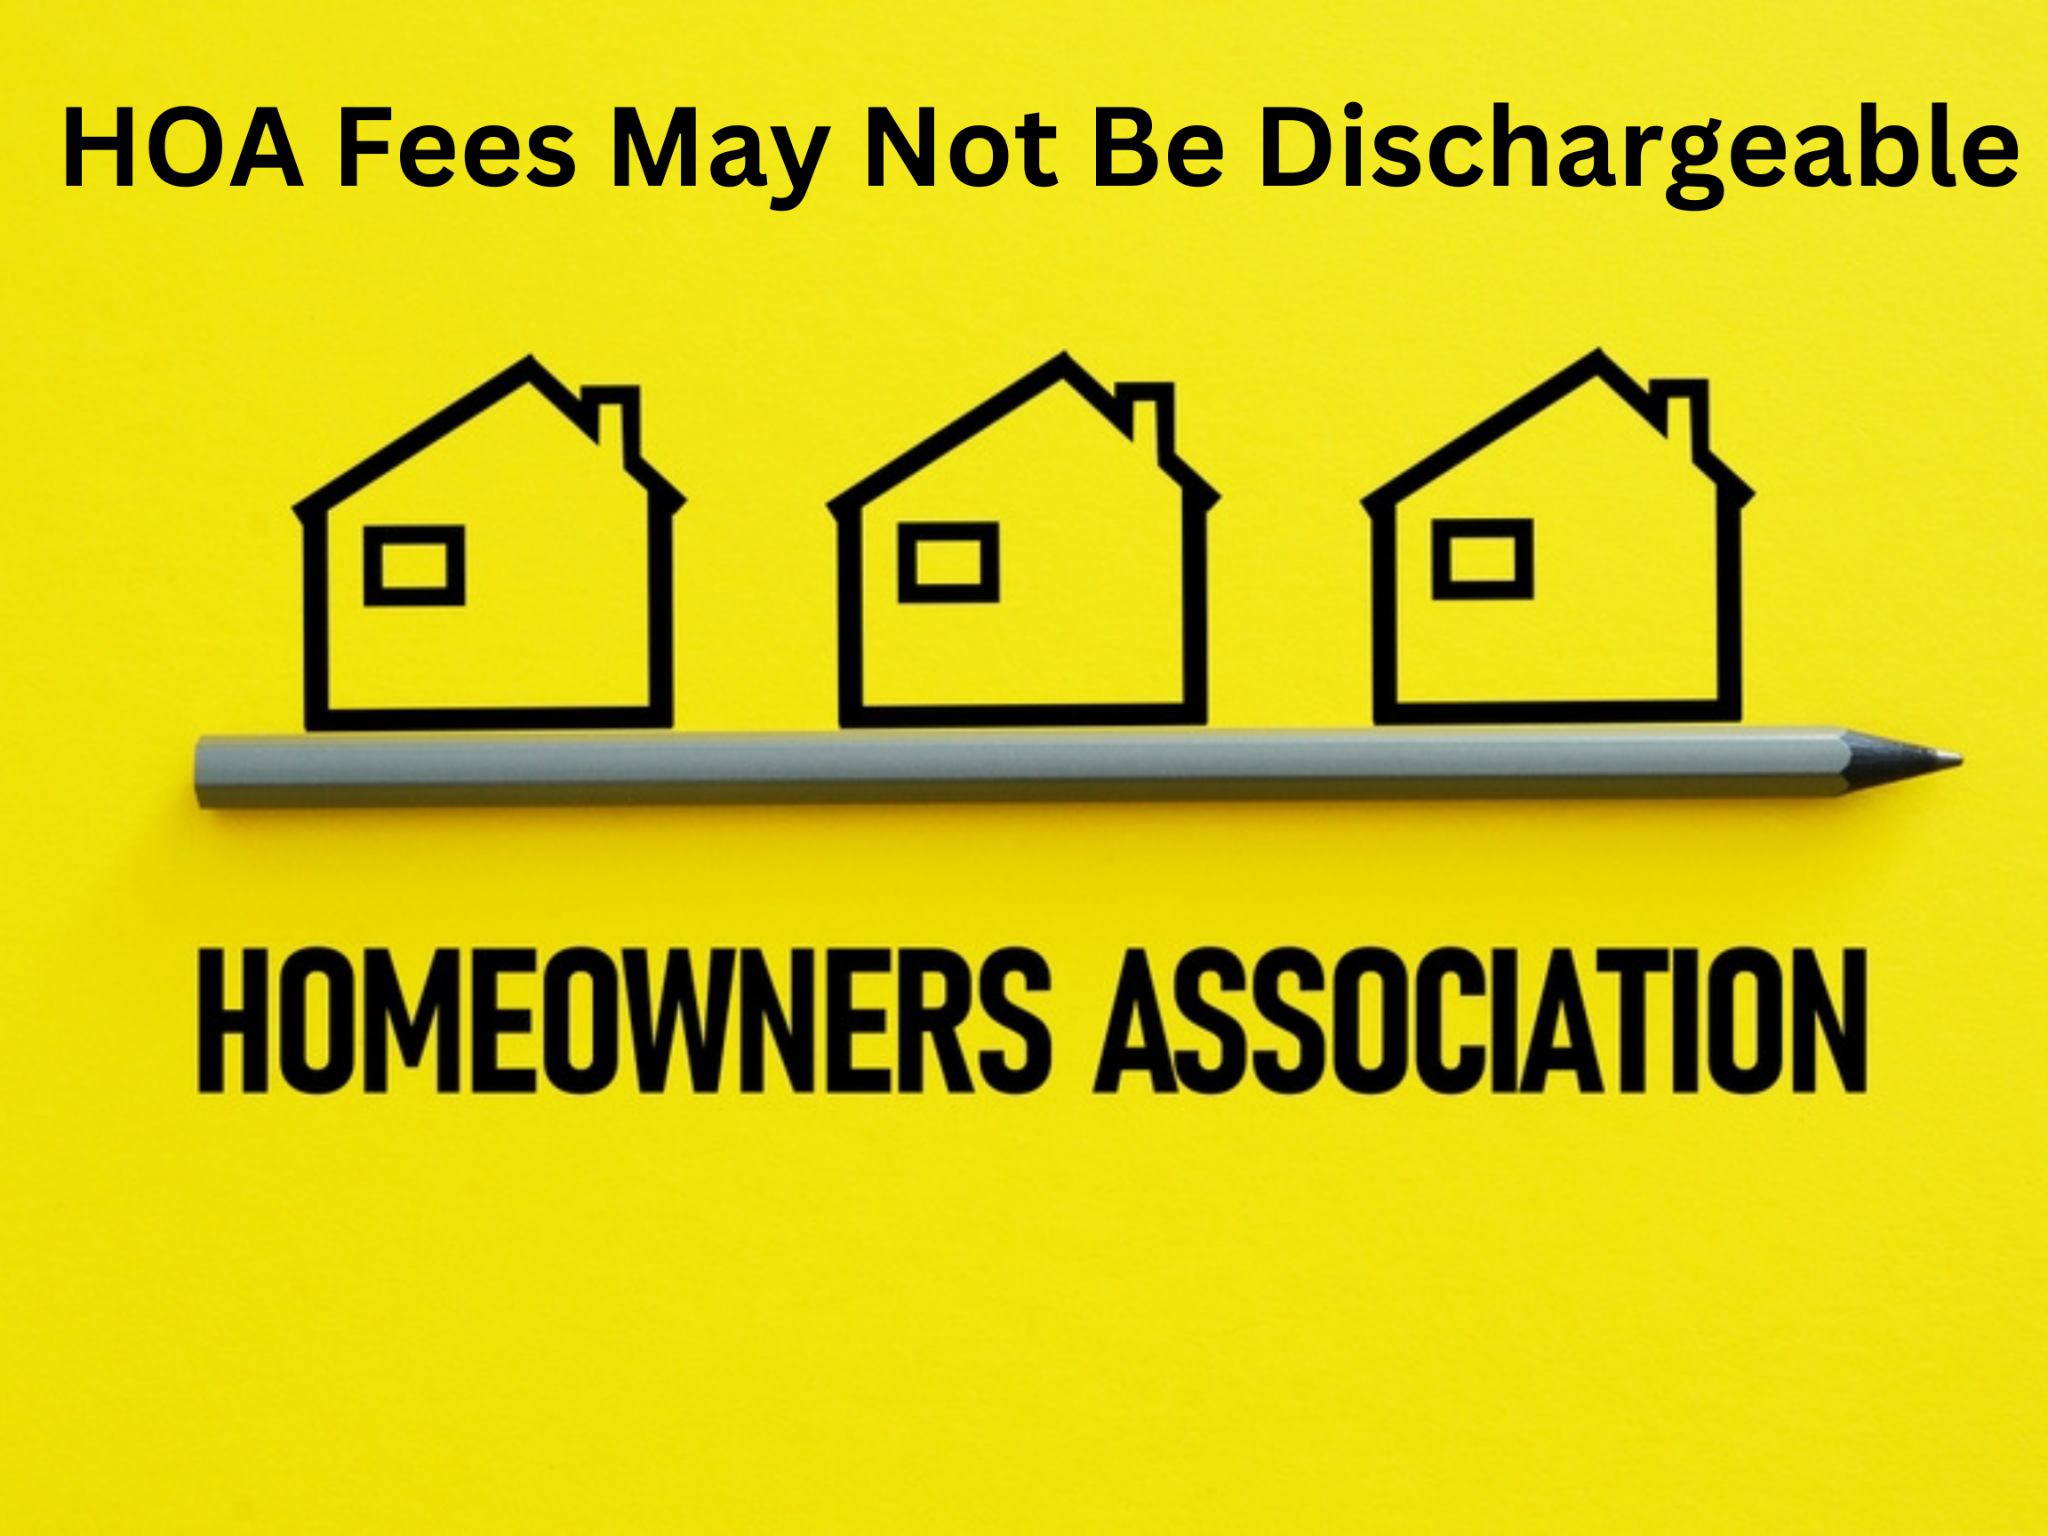 Yellow background with black text stating "HOA Fees May Not Be Dischargeable." Below text, there are three house icons and the words "Homeowners Association" with a pen placed horizontally.